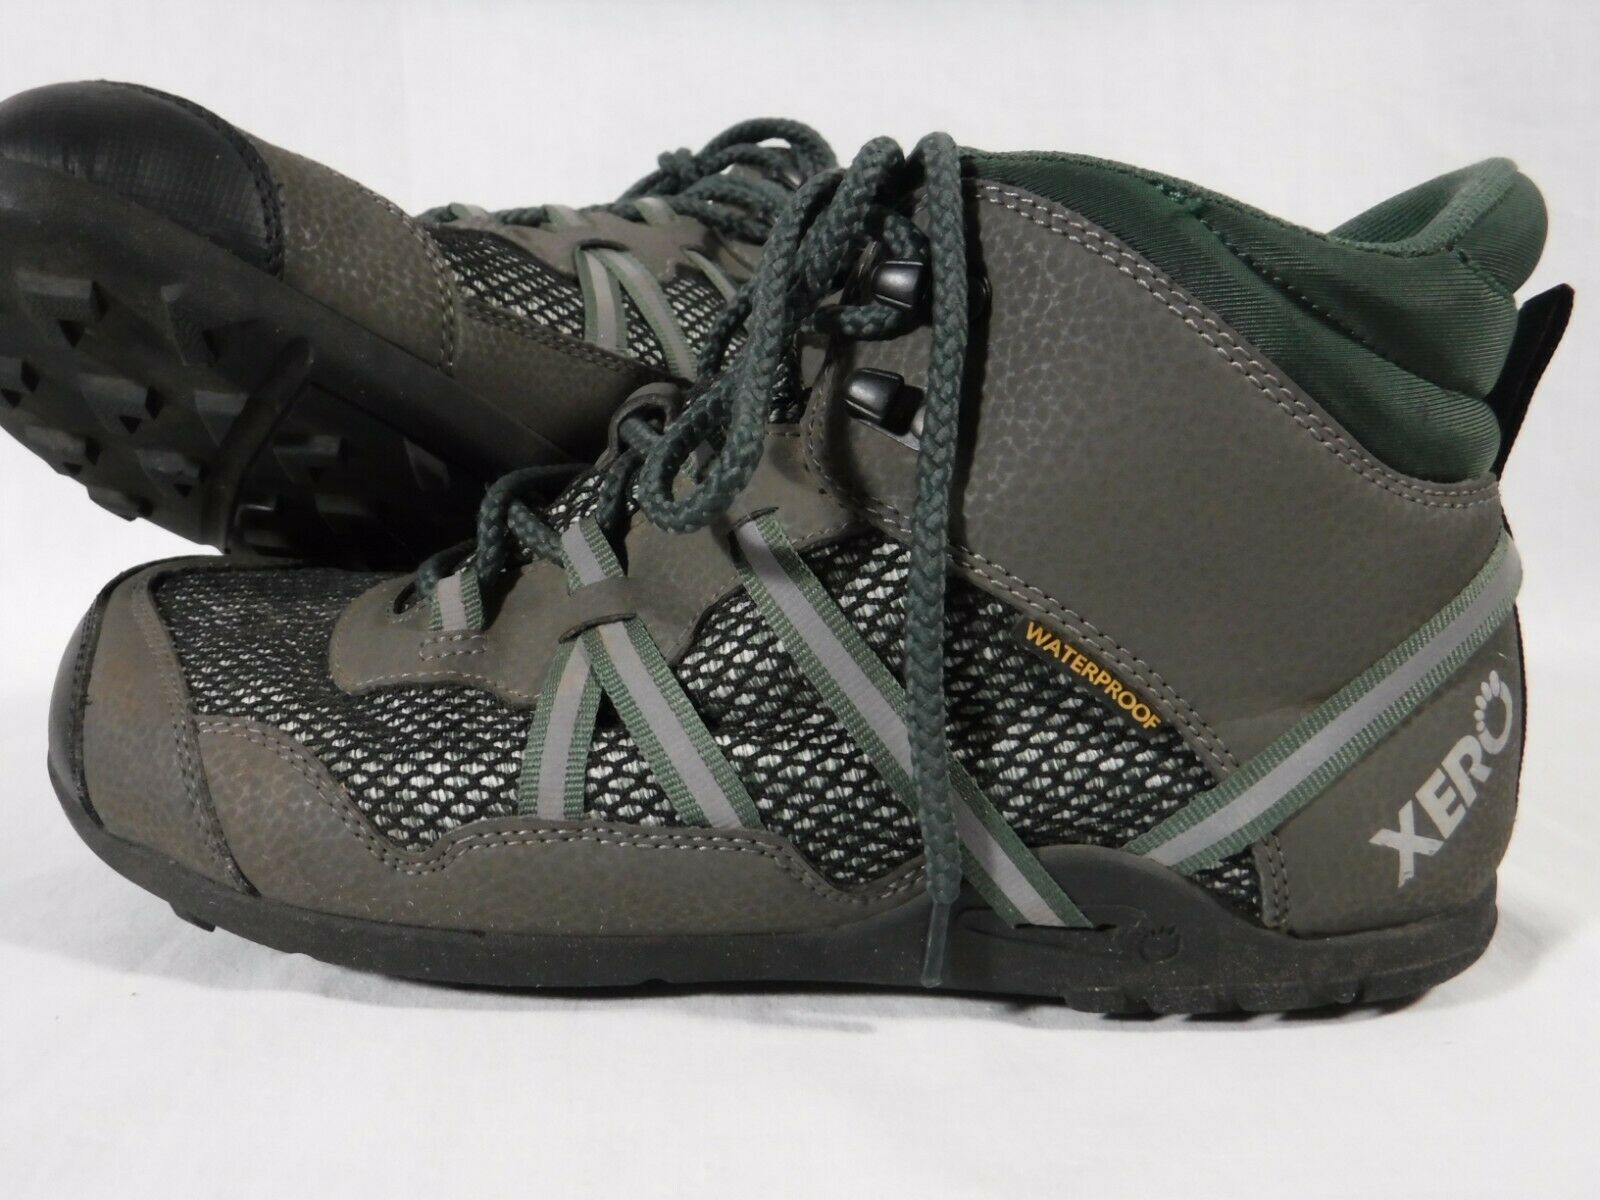 Xero Shoes Xcursion Men's Waterproof Forest Hiking Boots Size 9 Minimalist